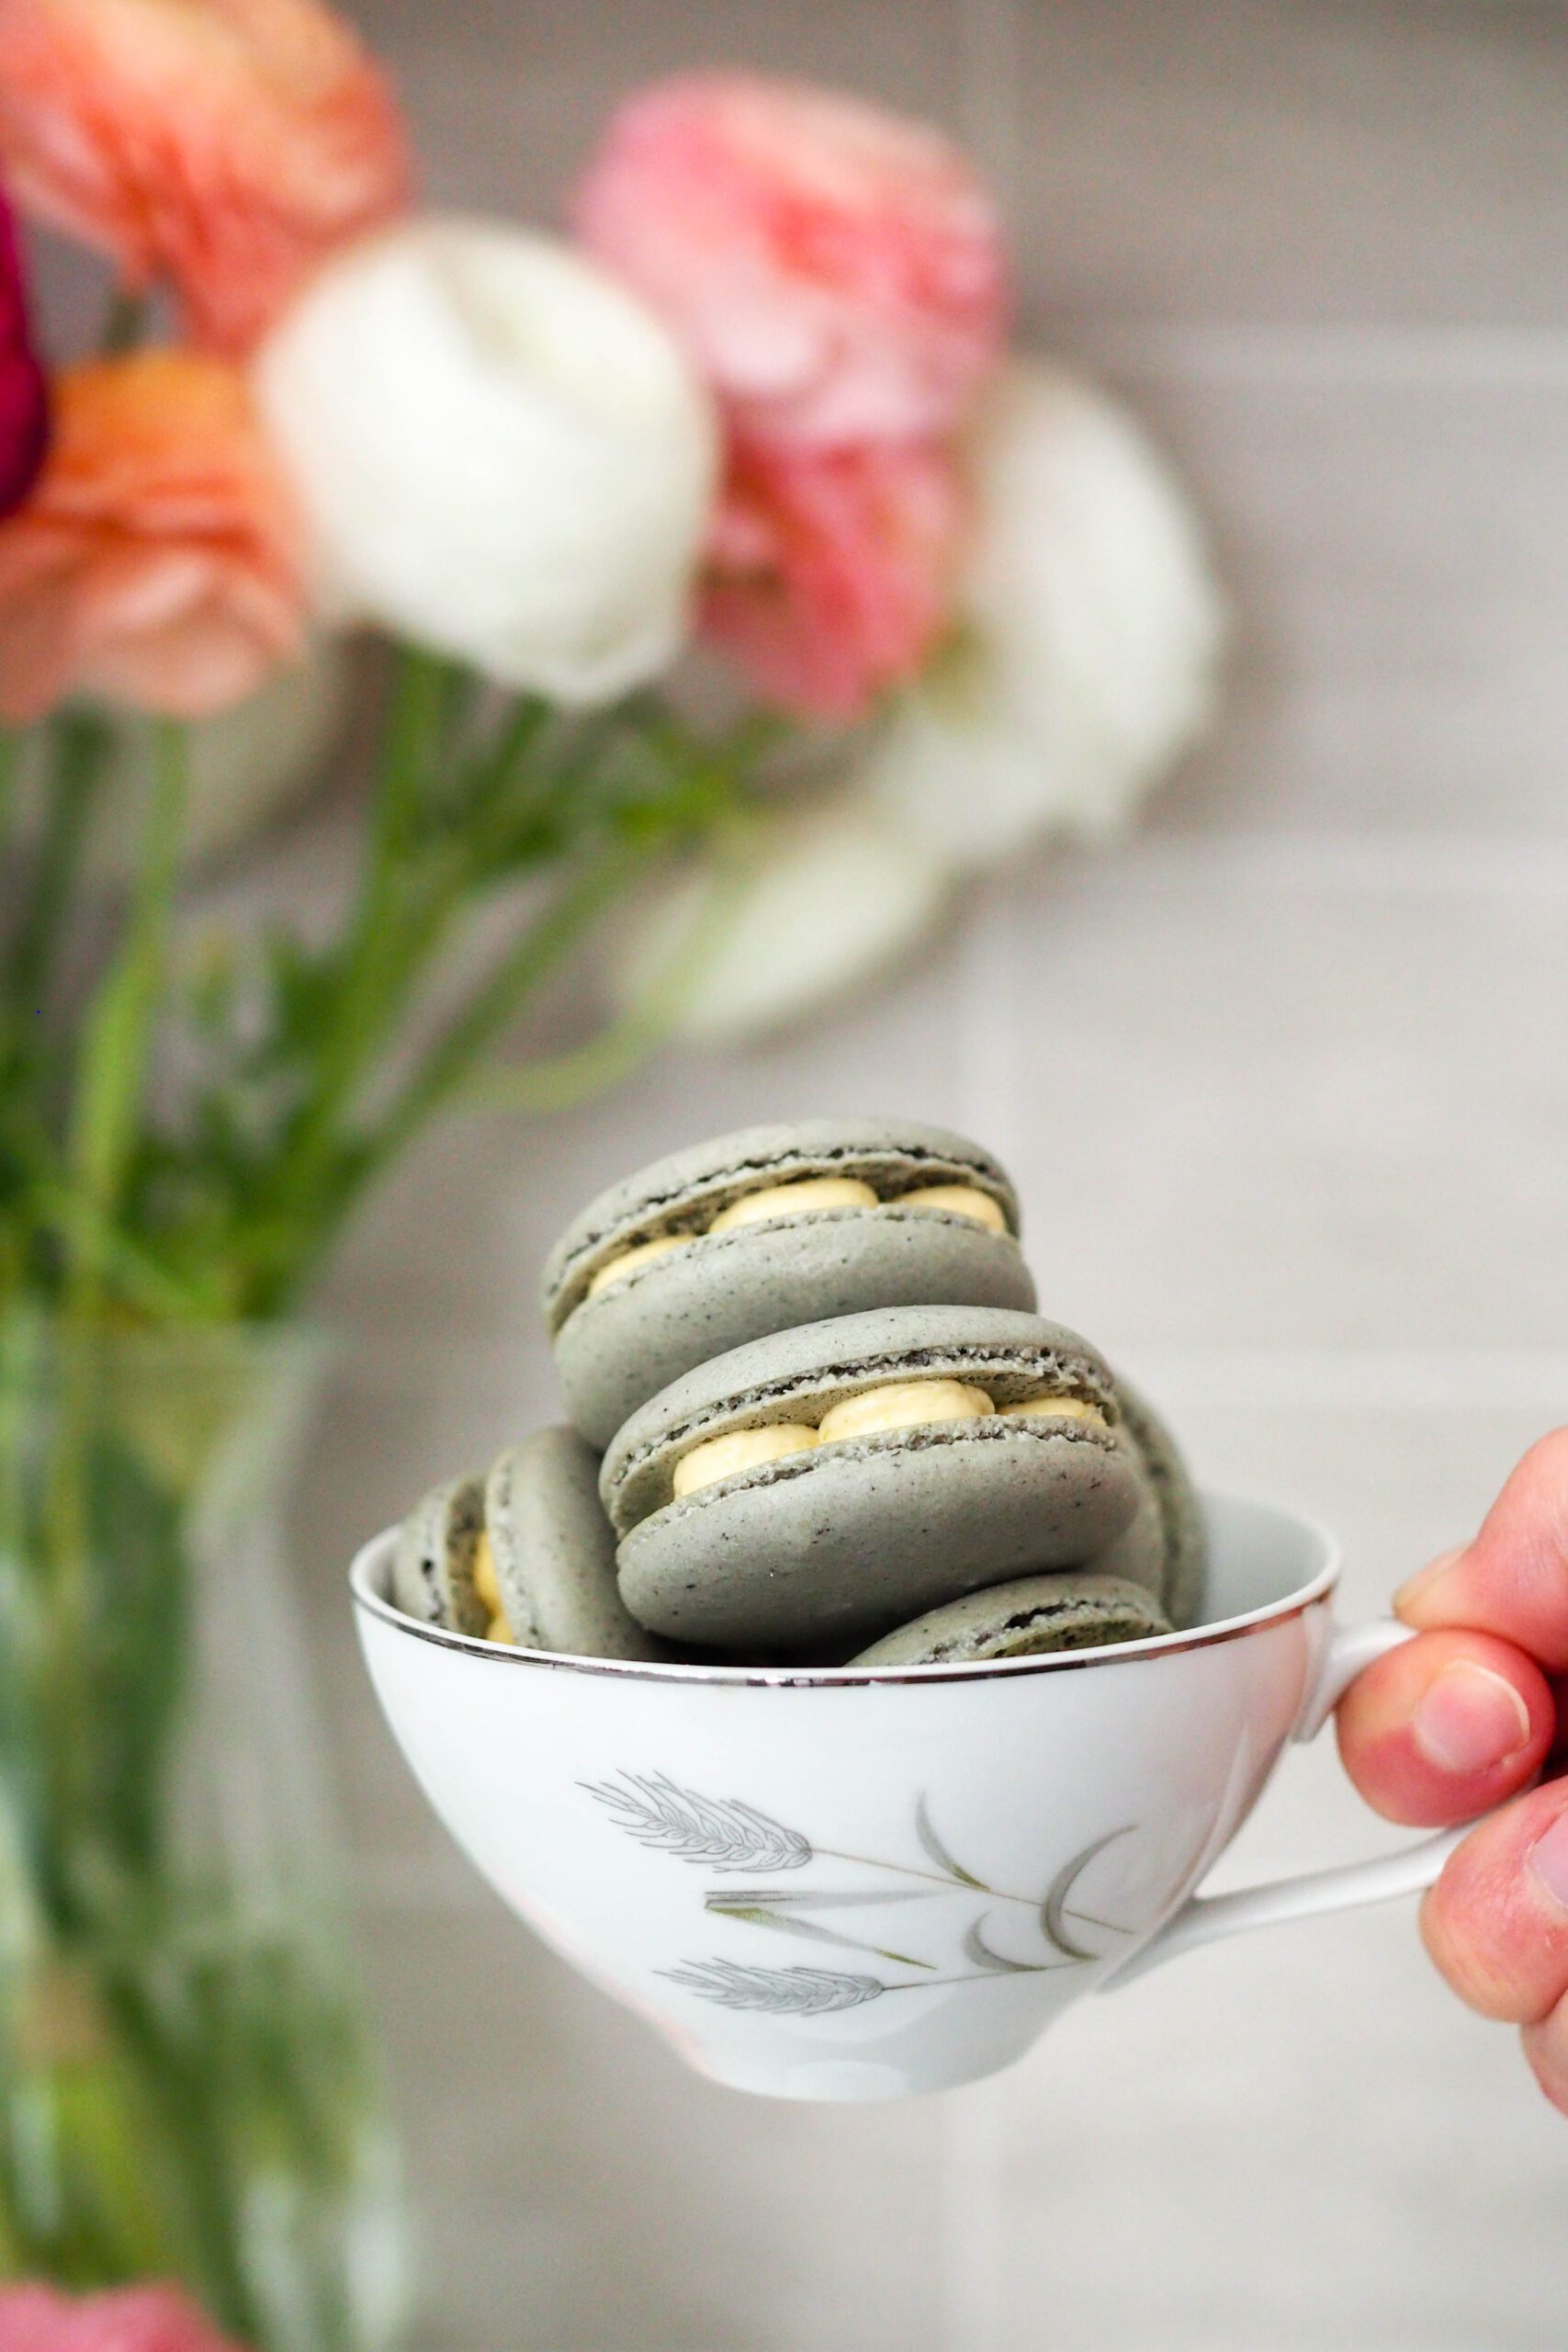 A hand holds up a teacup full of macarons.